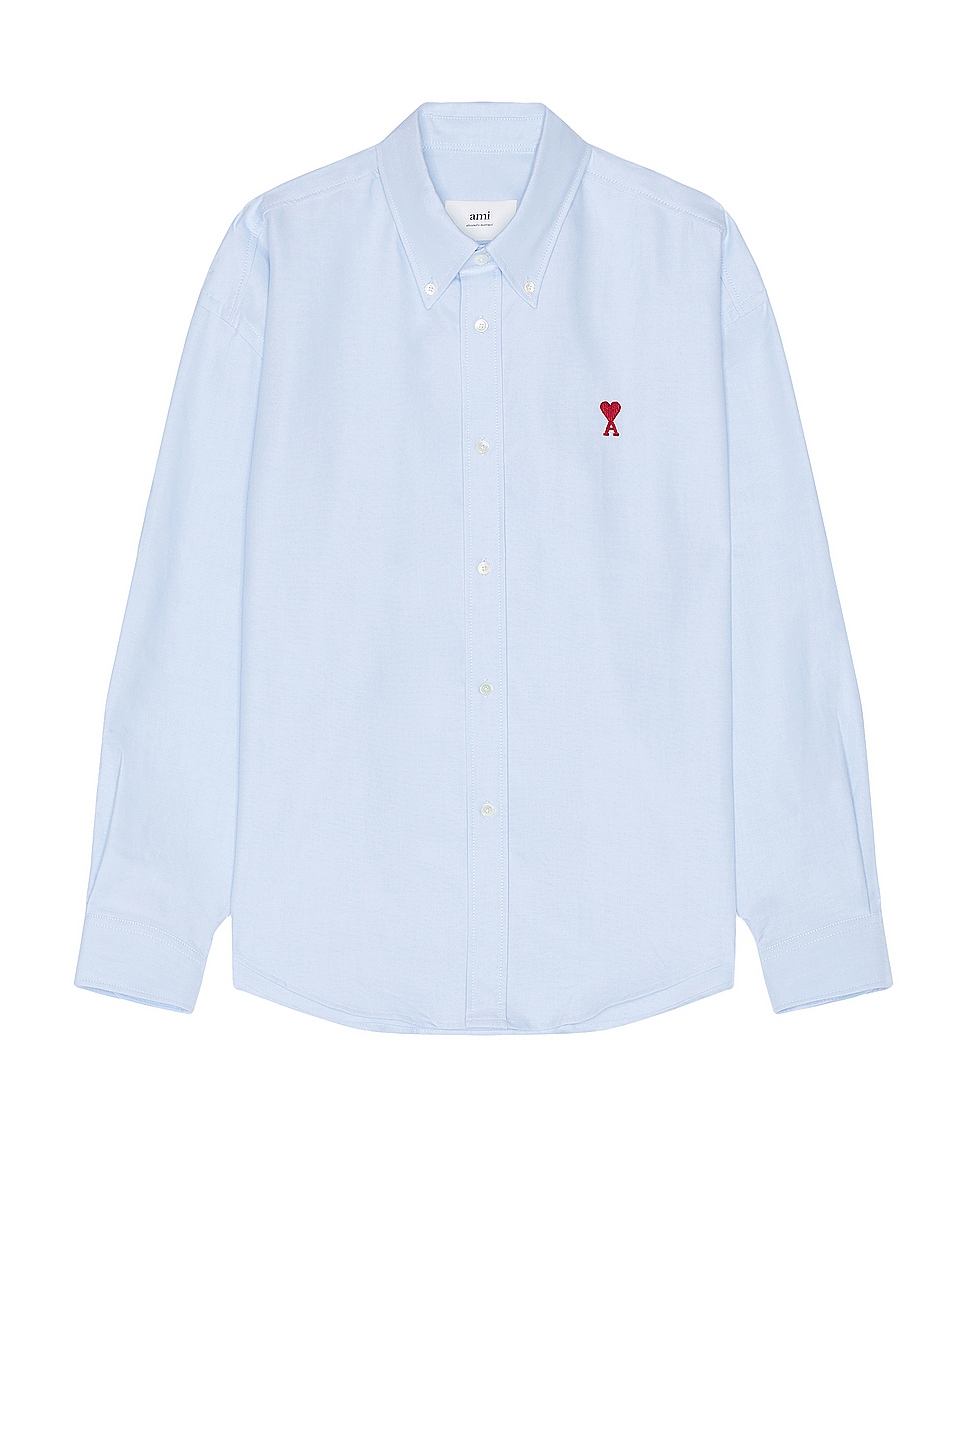 Image 1 of ami Boxy Fit Shirt in Sky Blue